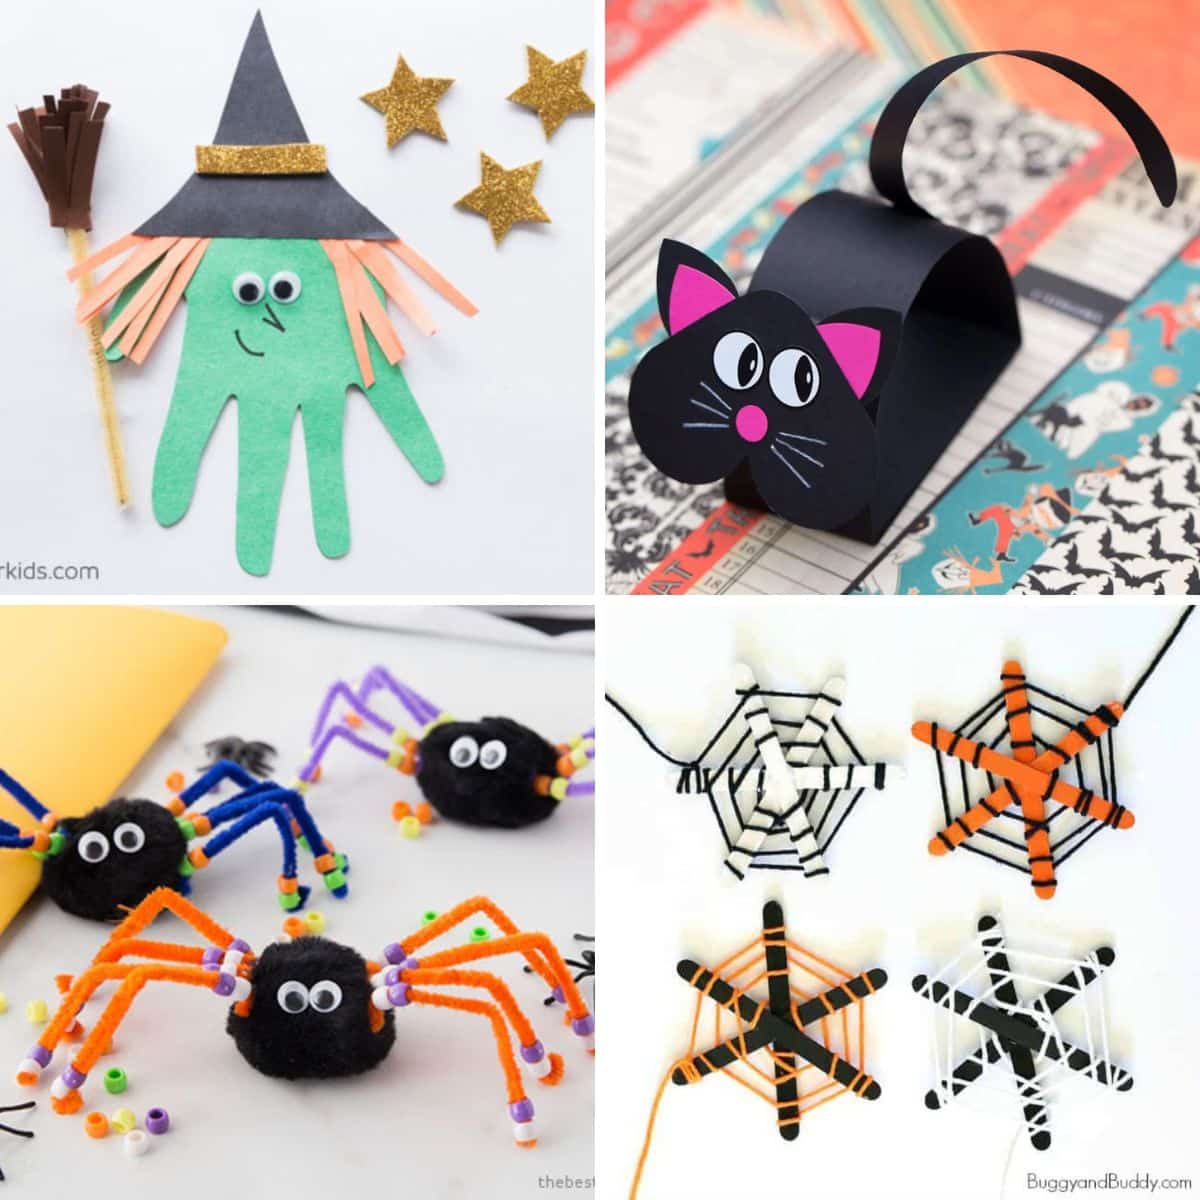 4 images of simple halloween crafts for kids.